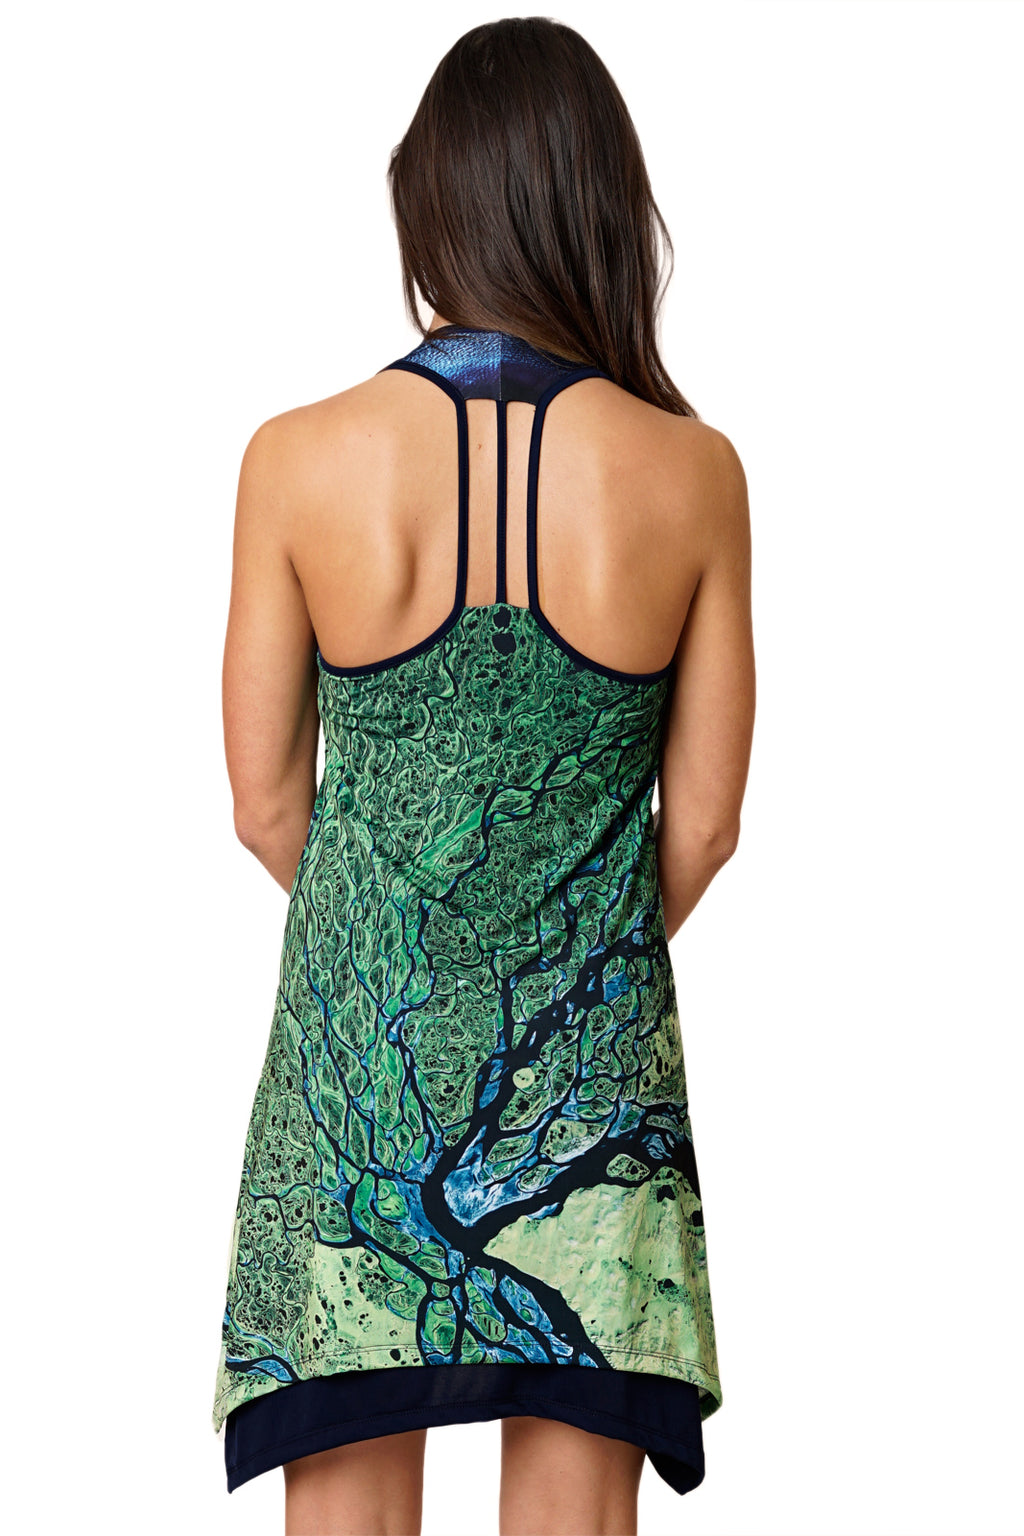 Gypsy Dress-National Geographic Clothing-Map Dress-Lena Delta-Back view